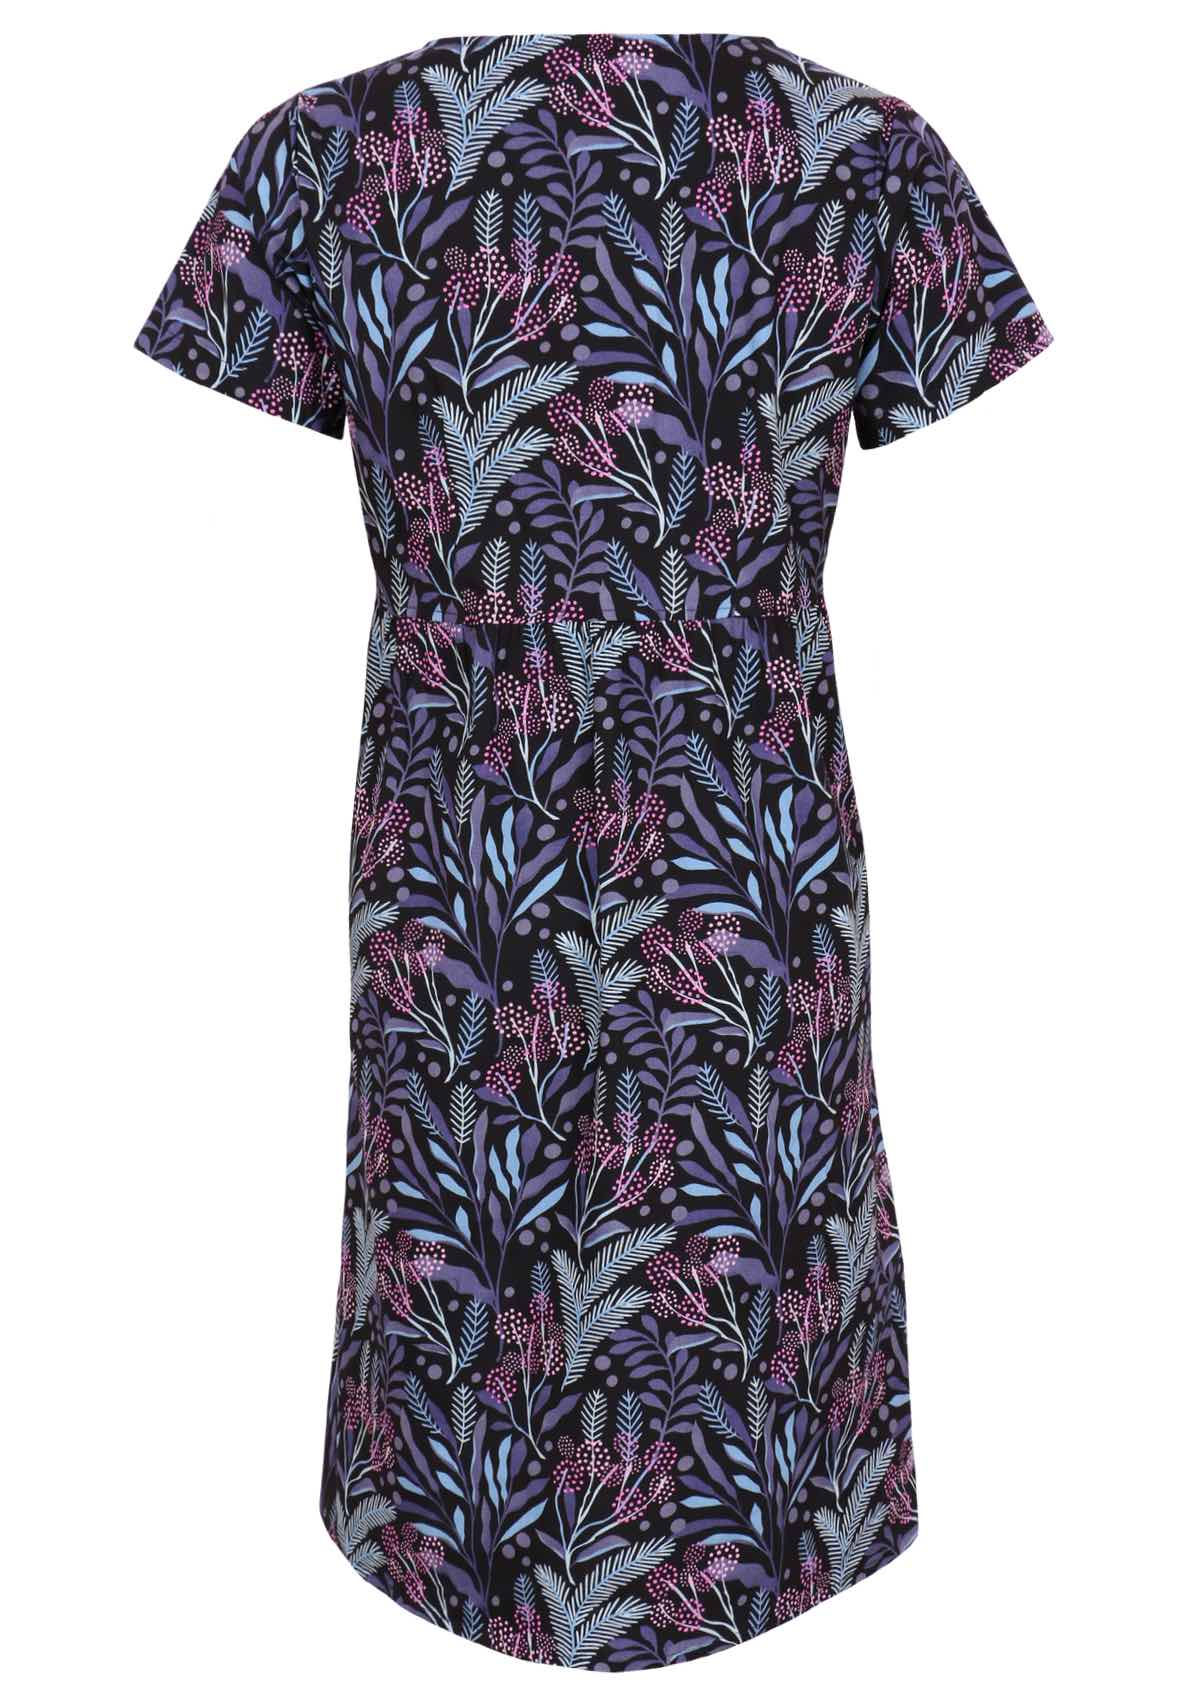 100% cotton black based floral print in blues, violet and pink